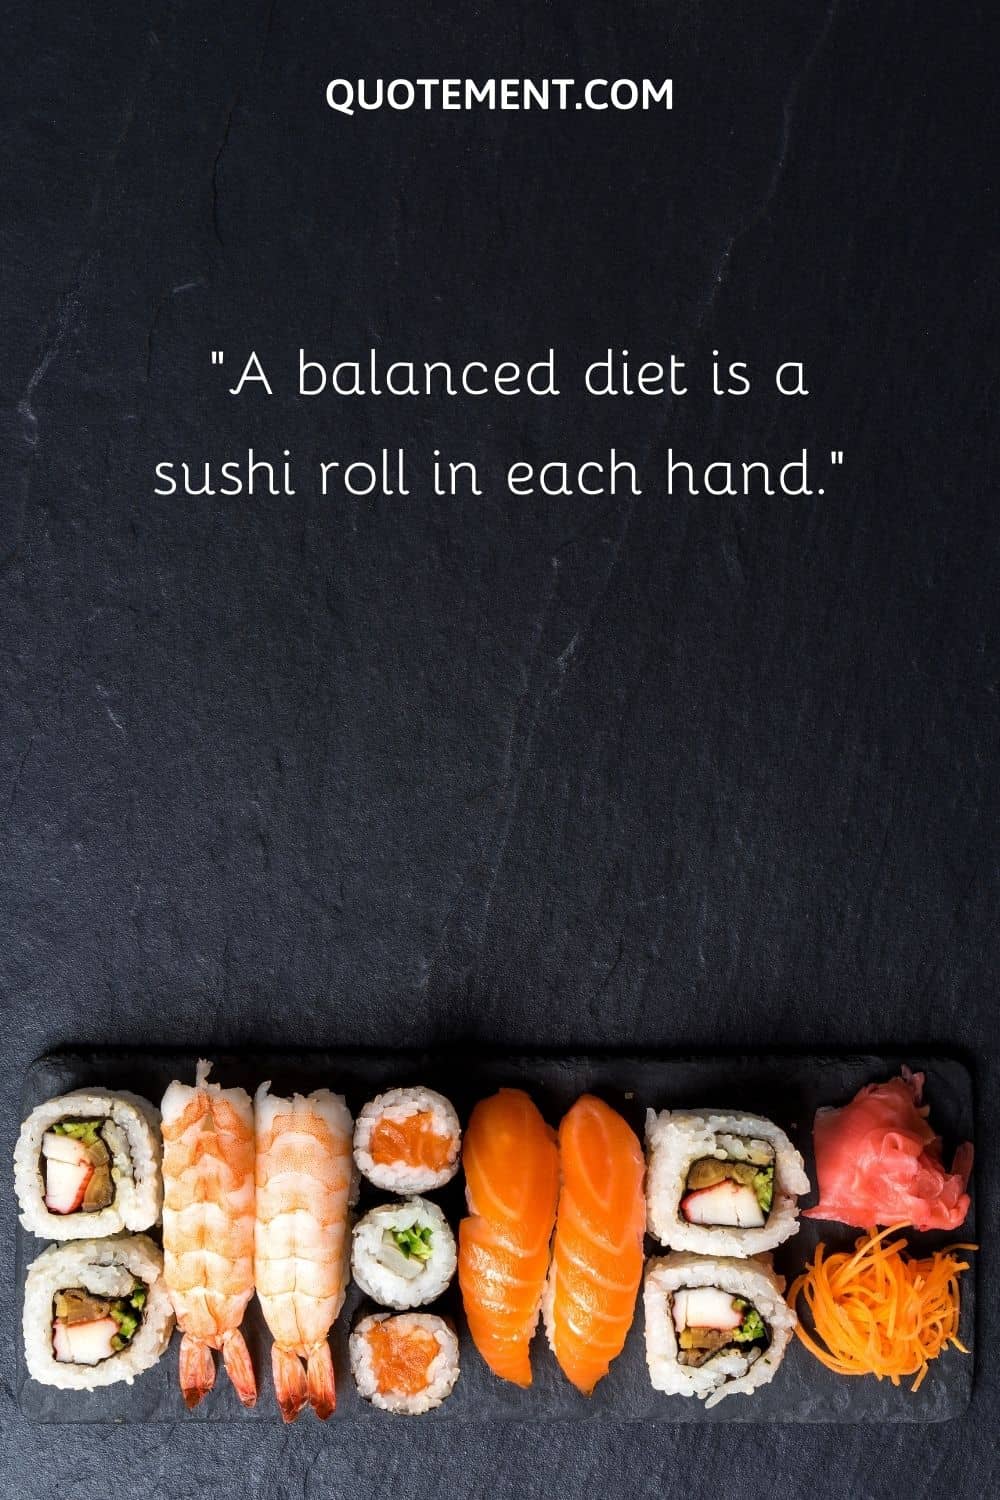 A balanced diet is a sushi roll in each hand.